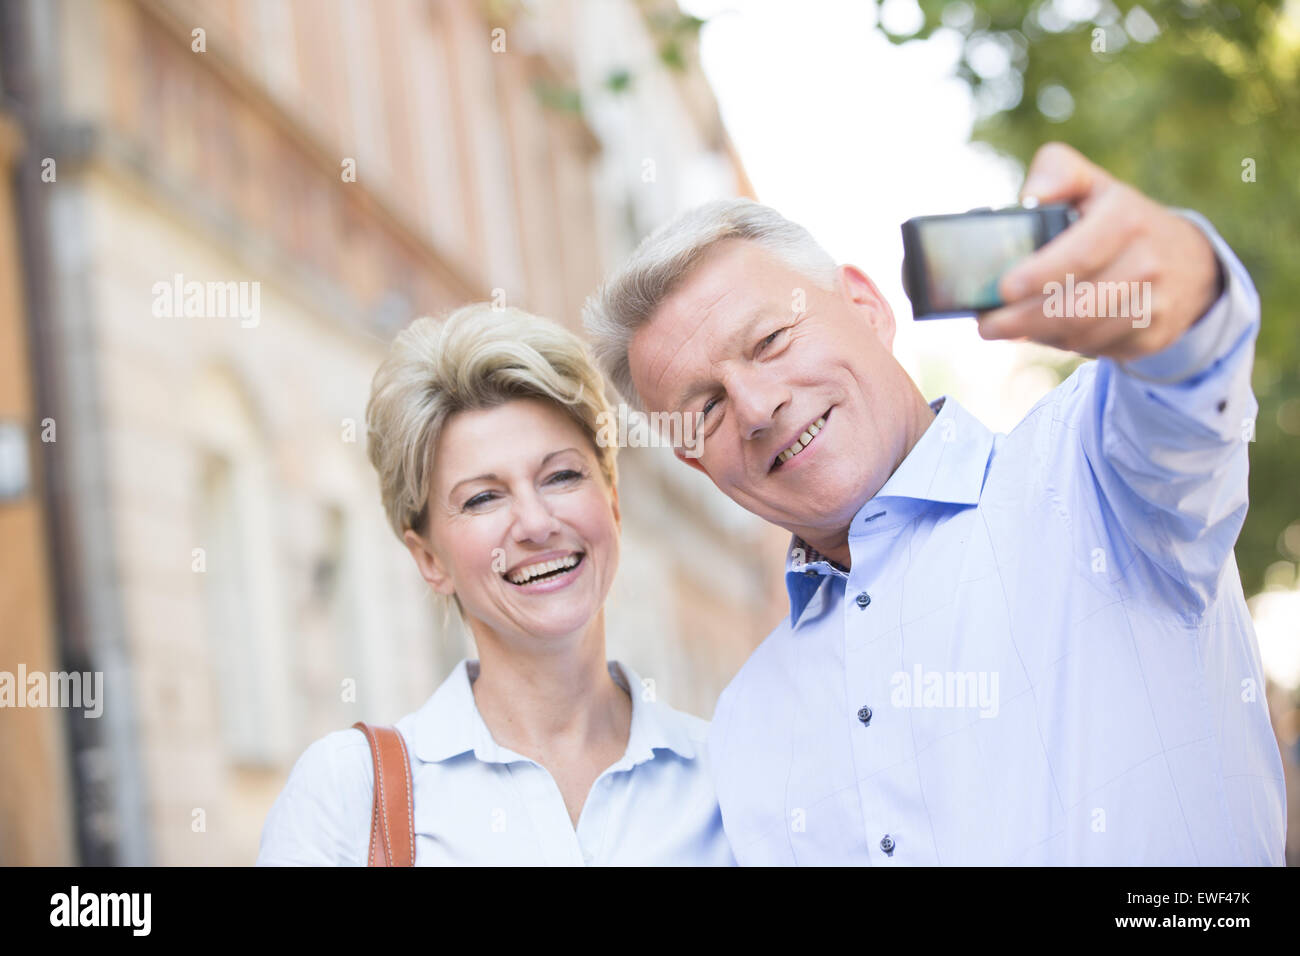 Cheerful middle-aged couple taking self portrait outdoors Stock Photo